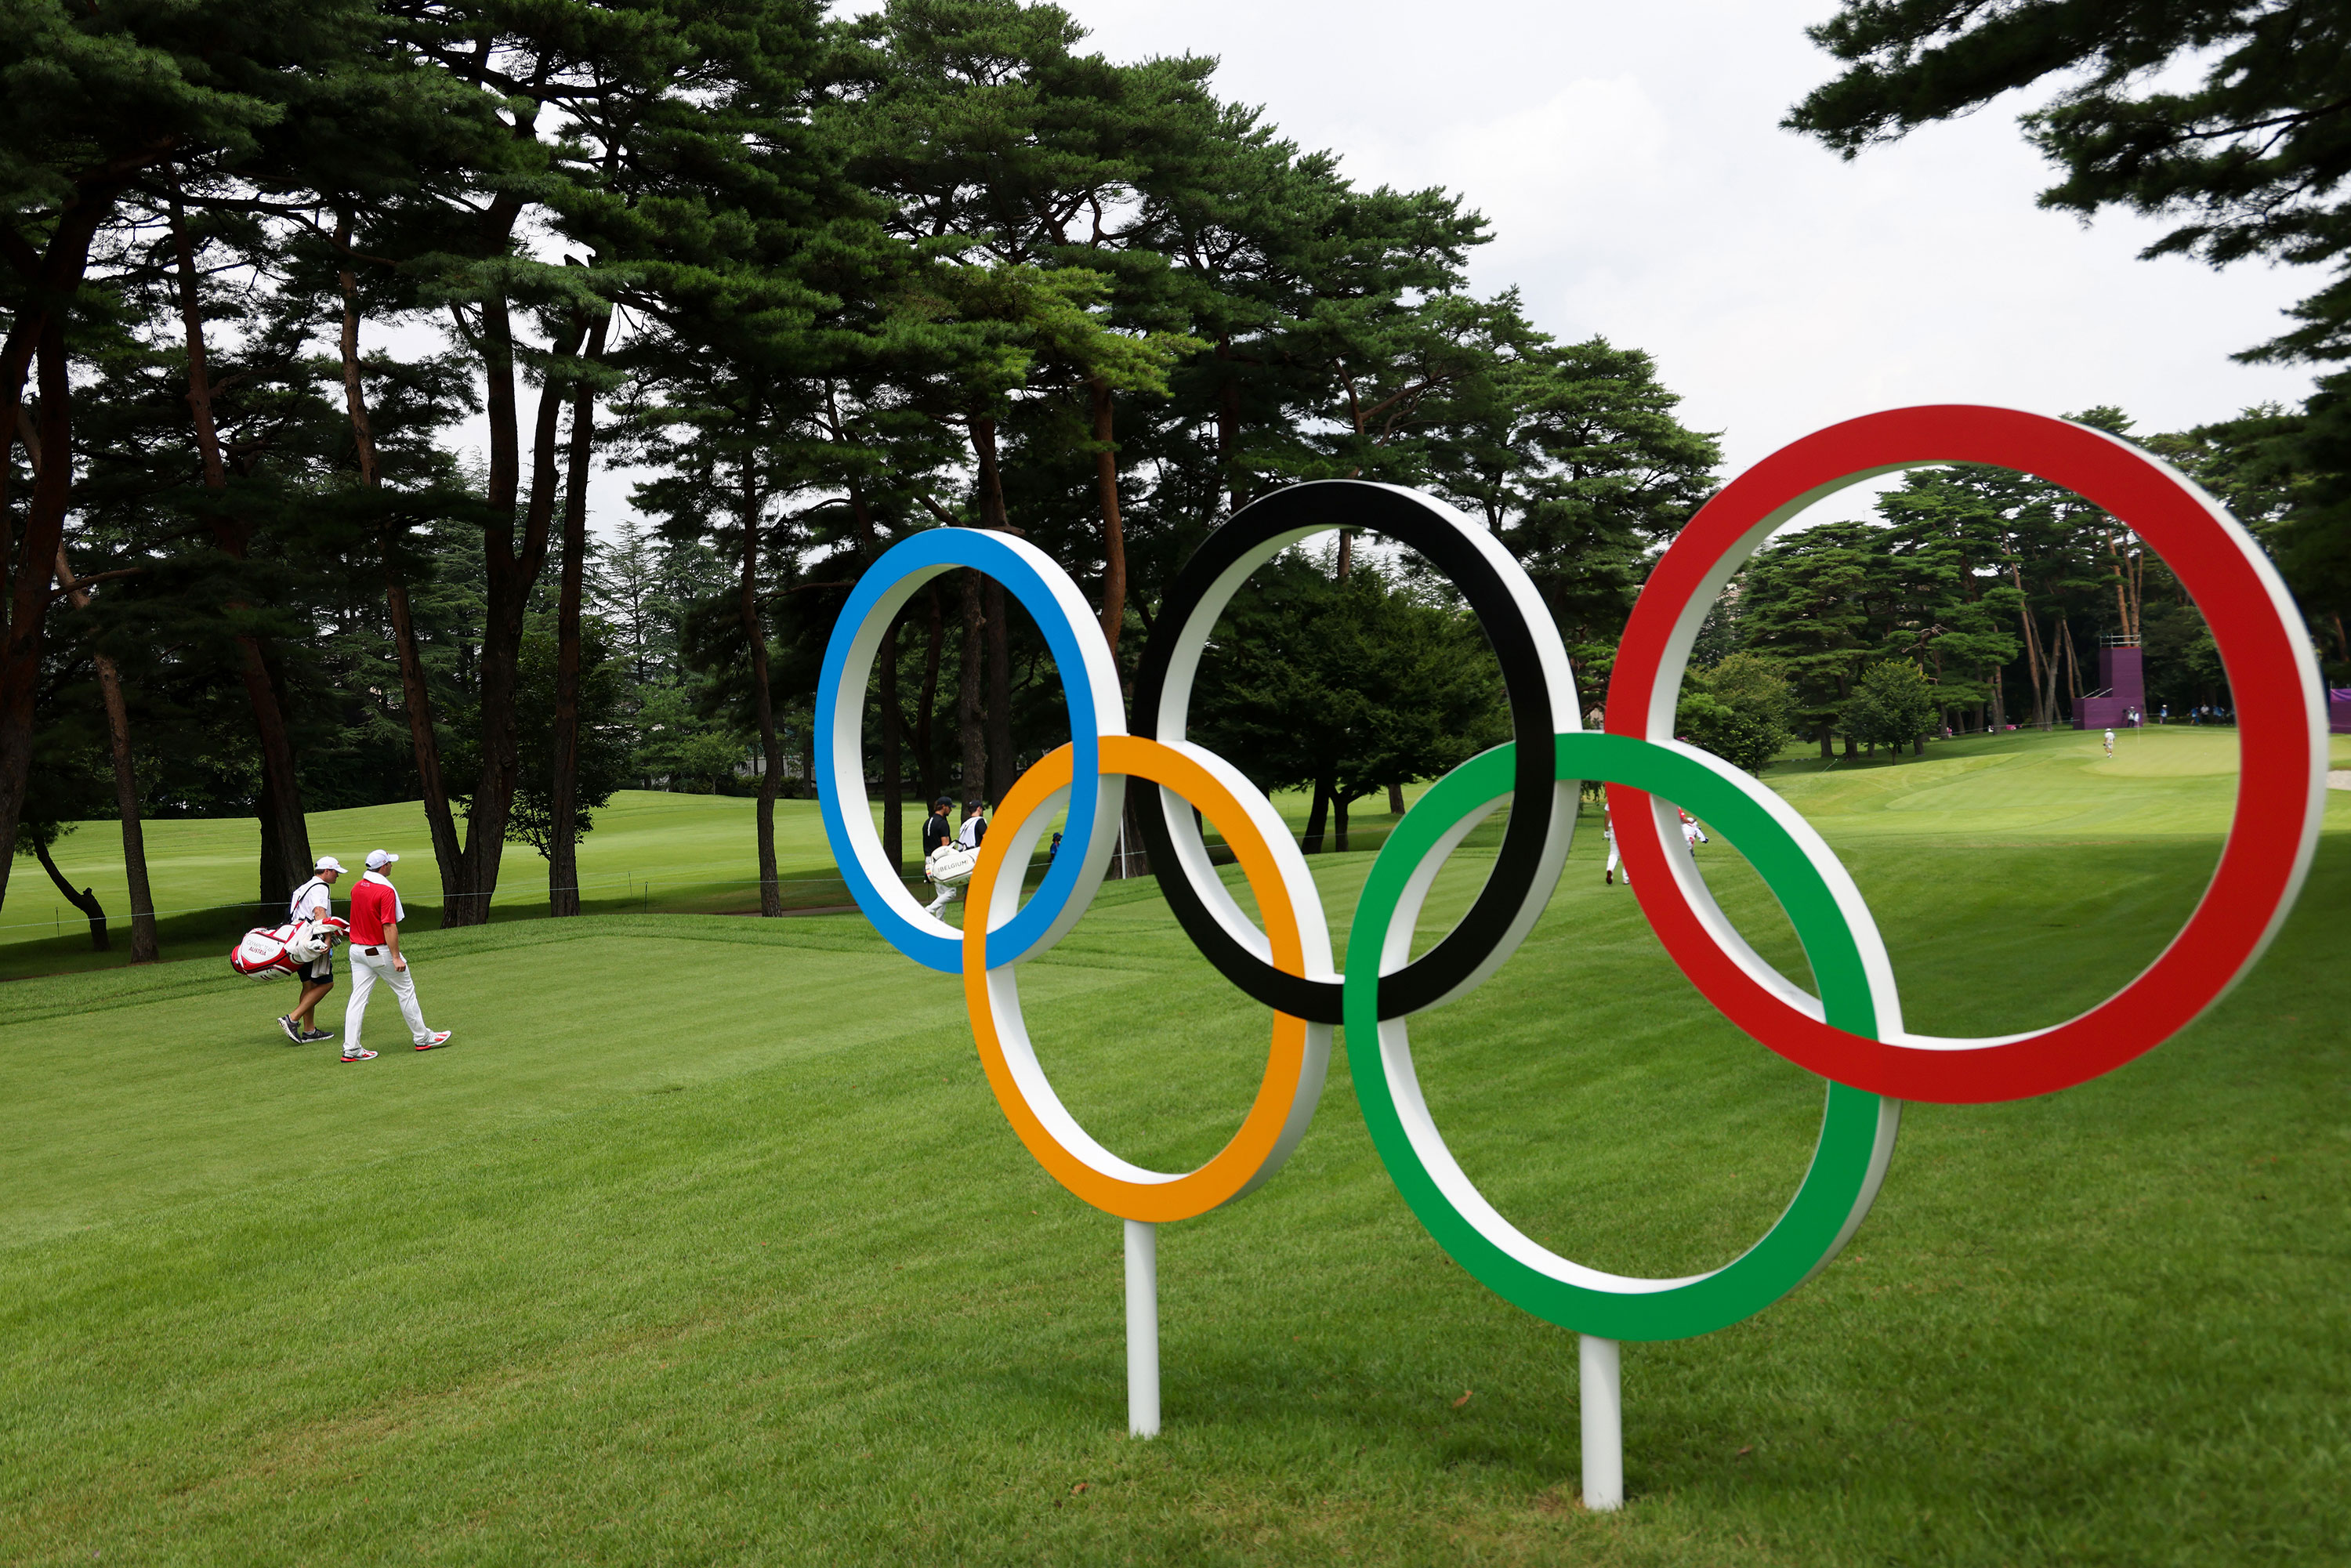 Australia's Sepp Straka and his younger brother Samuel Straka walk past the Olympic rings on the 16th hole in the first round of the individual stroke event in Kawagoe, Japan on July 29.